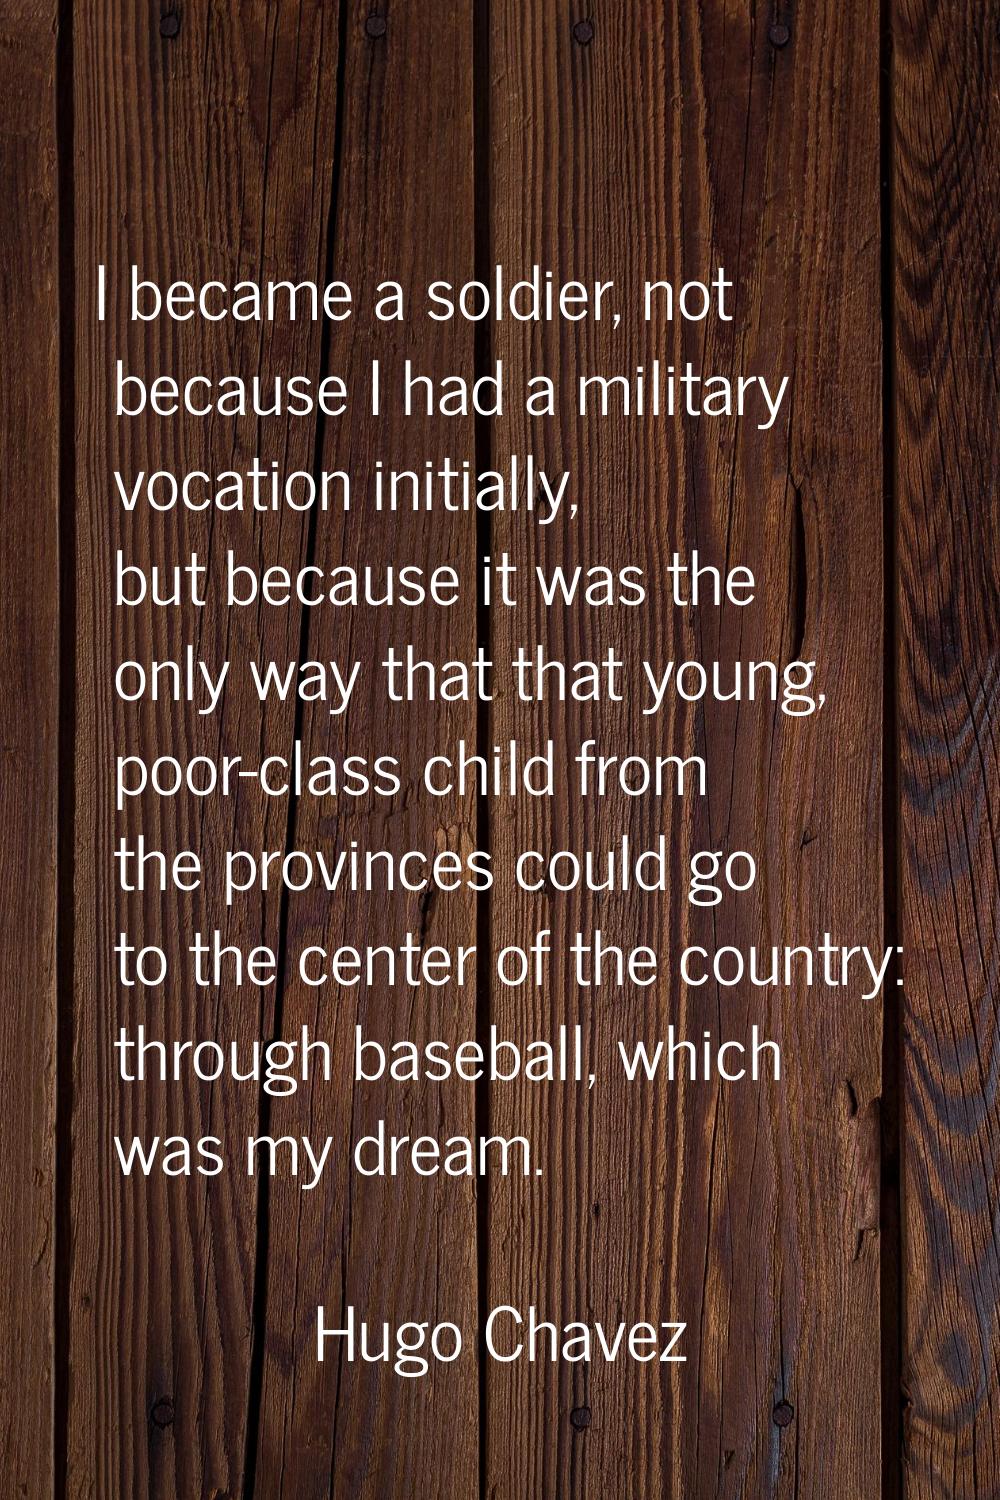 I became a soldier, not because I had a military vocation initially, but because it was the only wa